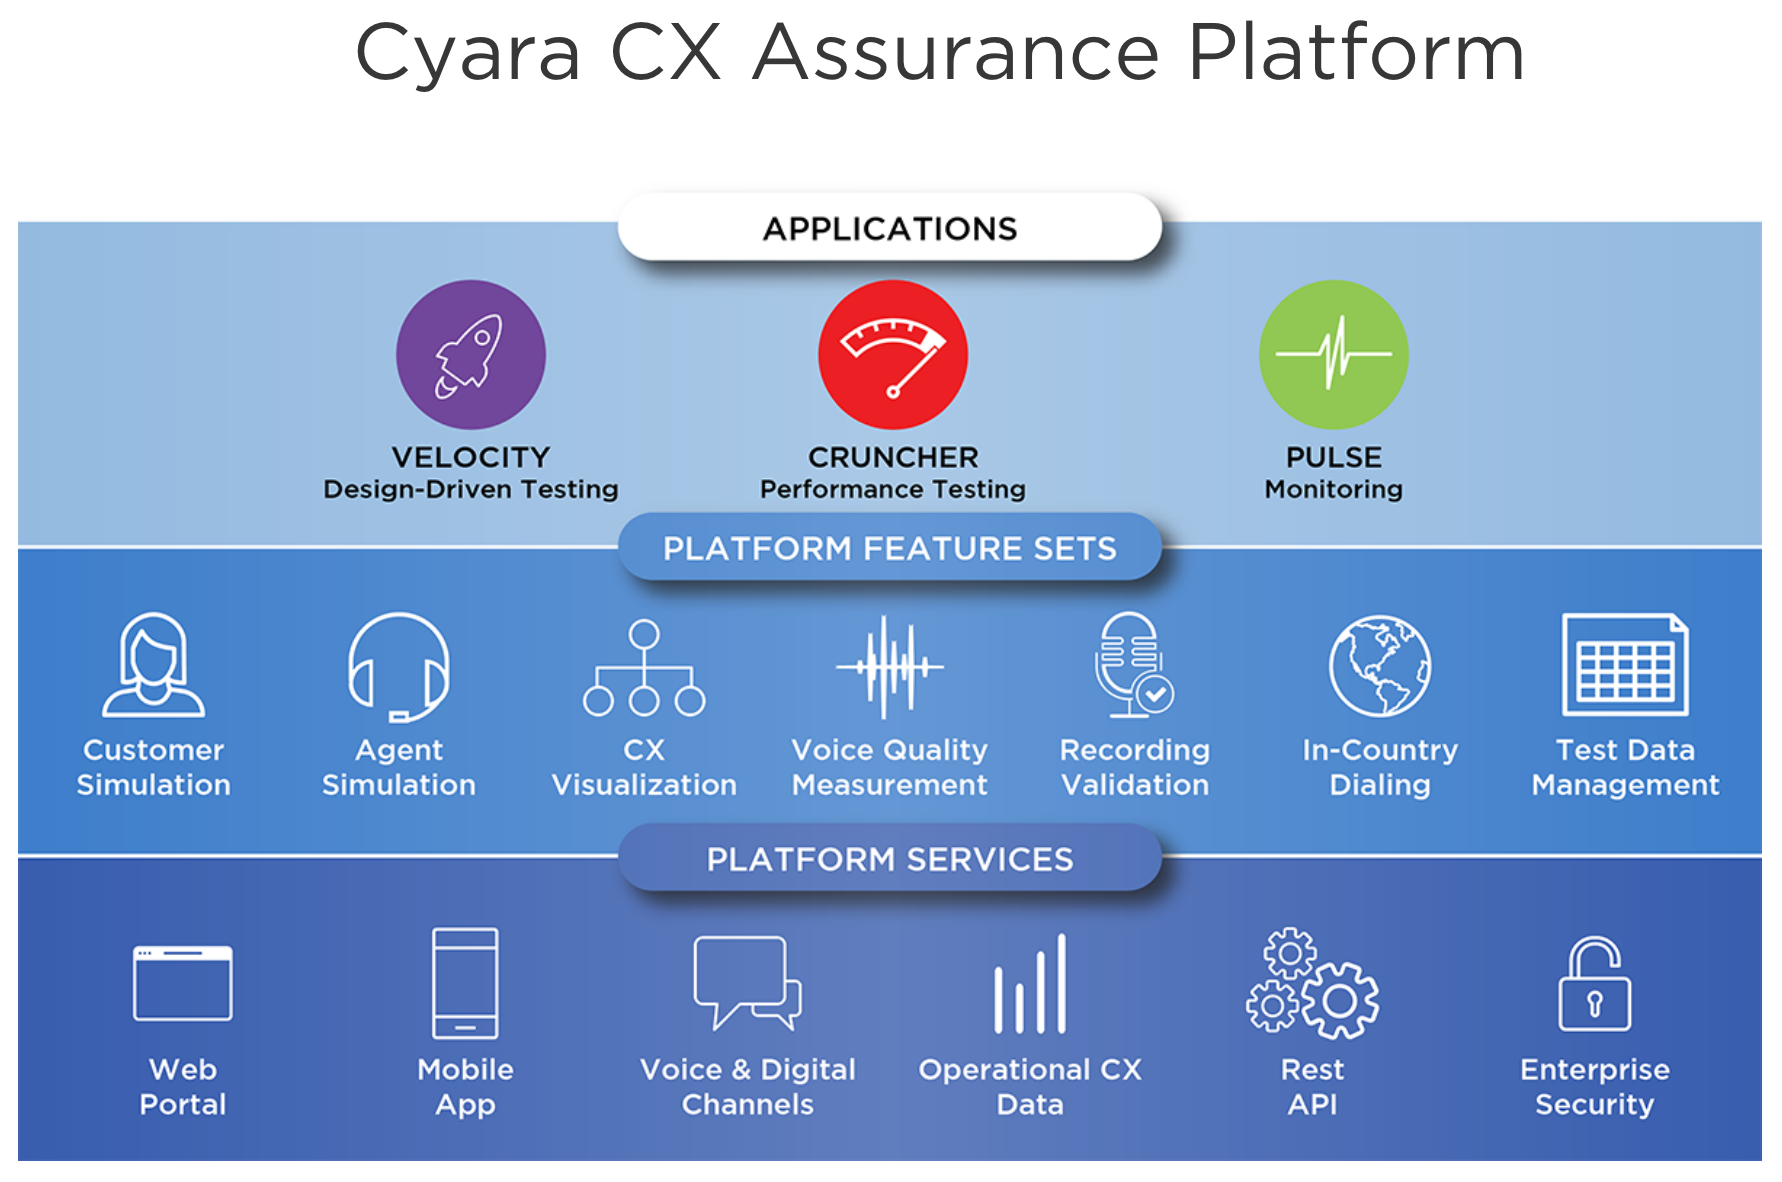 Accelerate CX testing, increase quality across digital and voice channels, and assure omnichannel customer journeys end-to-end.